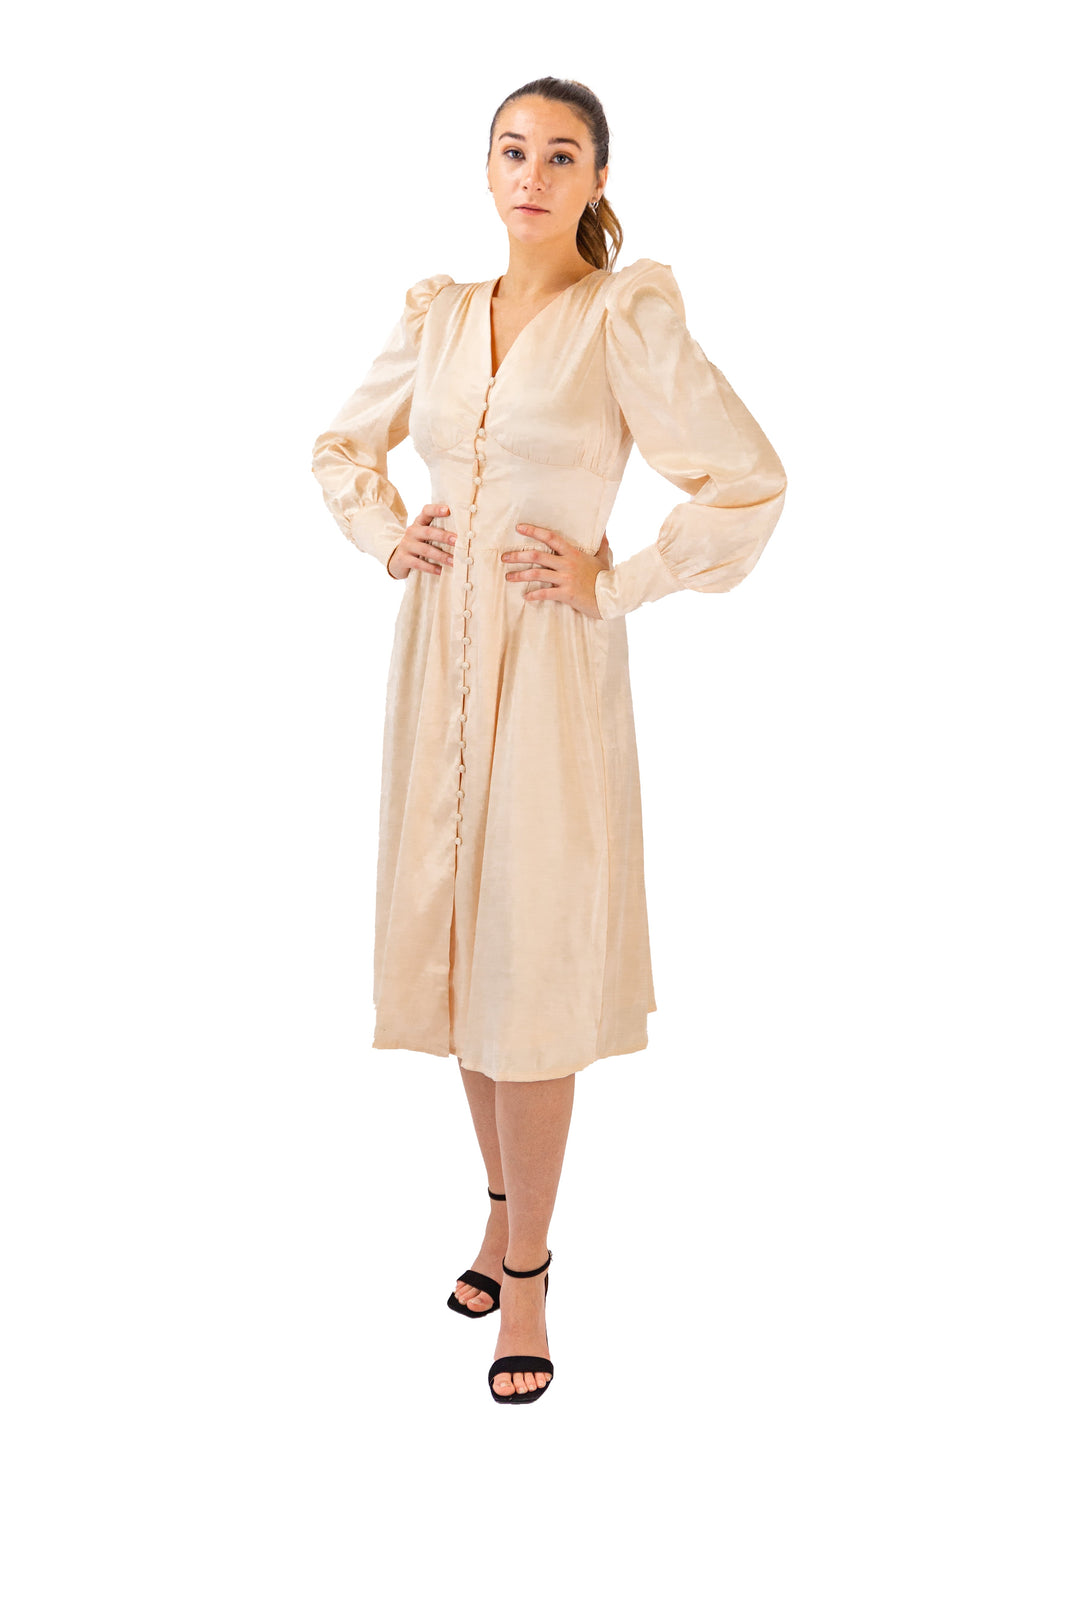 Elegant Beige Pleated Lantern Sleeve Dress by Fabonics, Perfect for Sophisticated Occasions